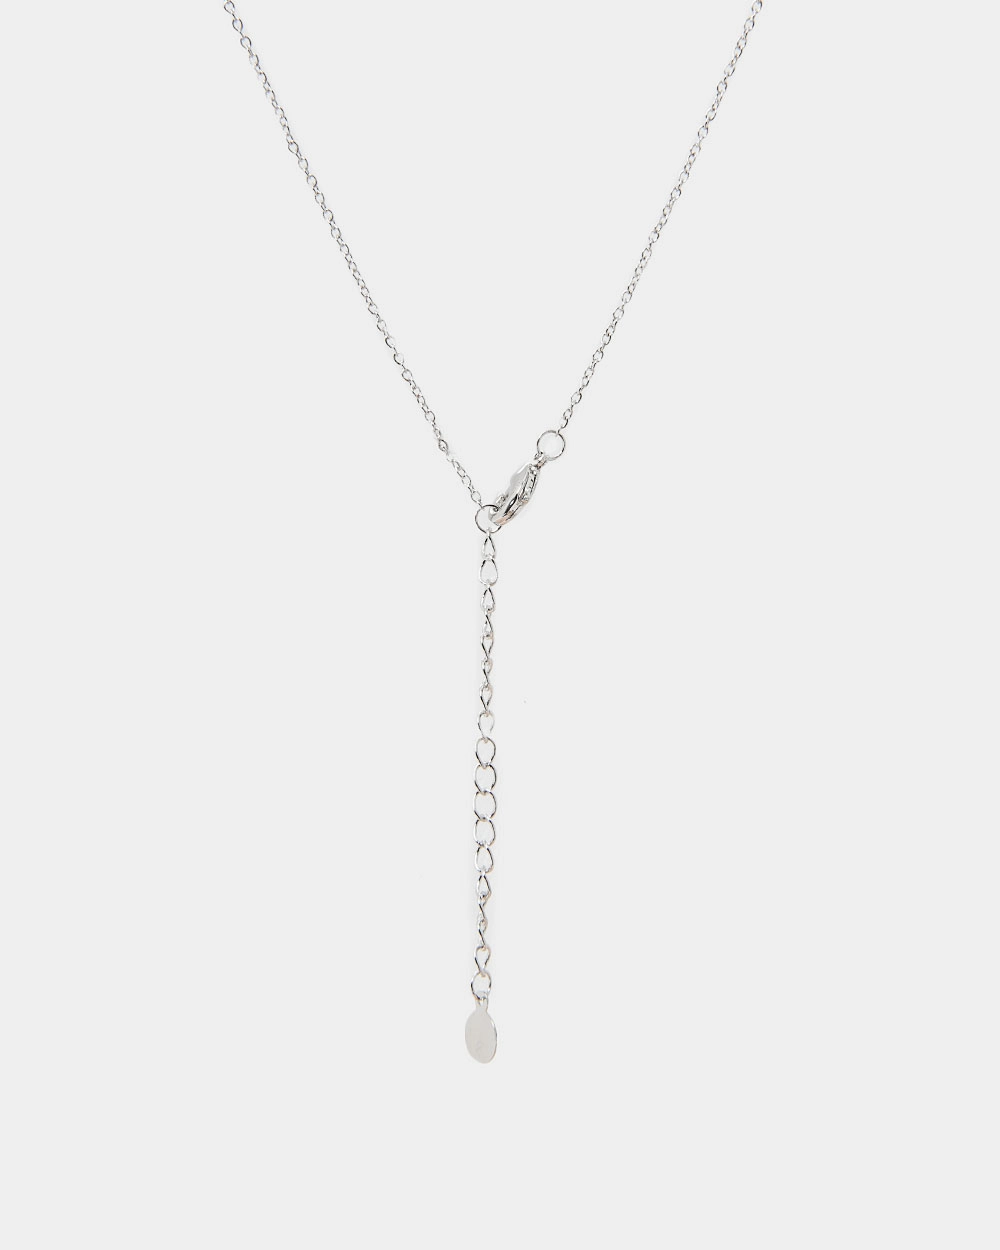 Devyn Sterling Silver Plated Necklace